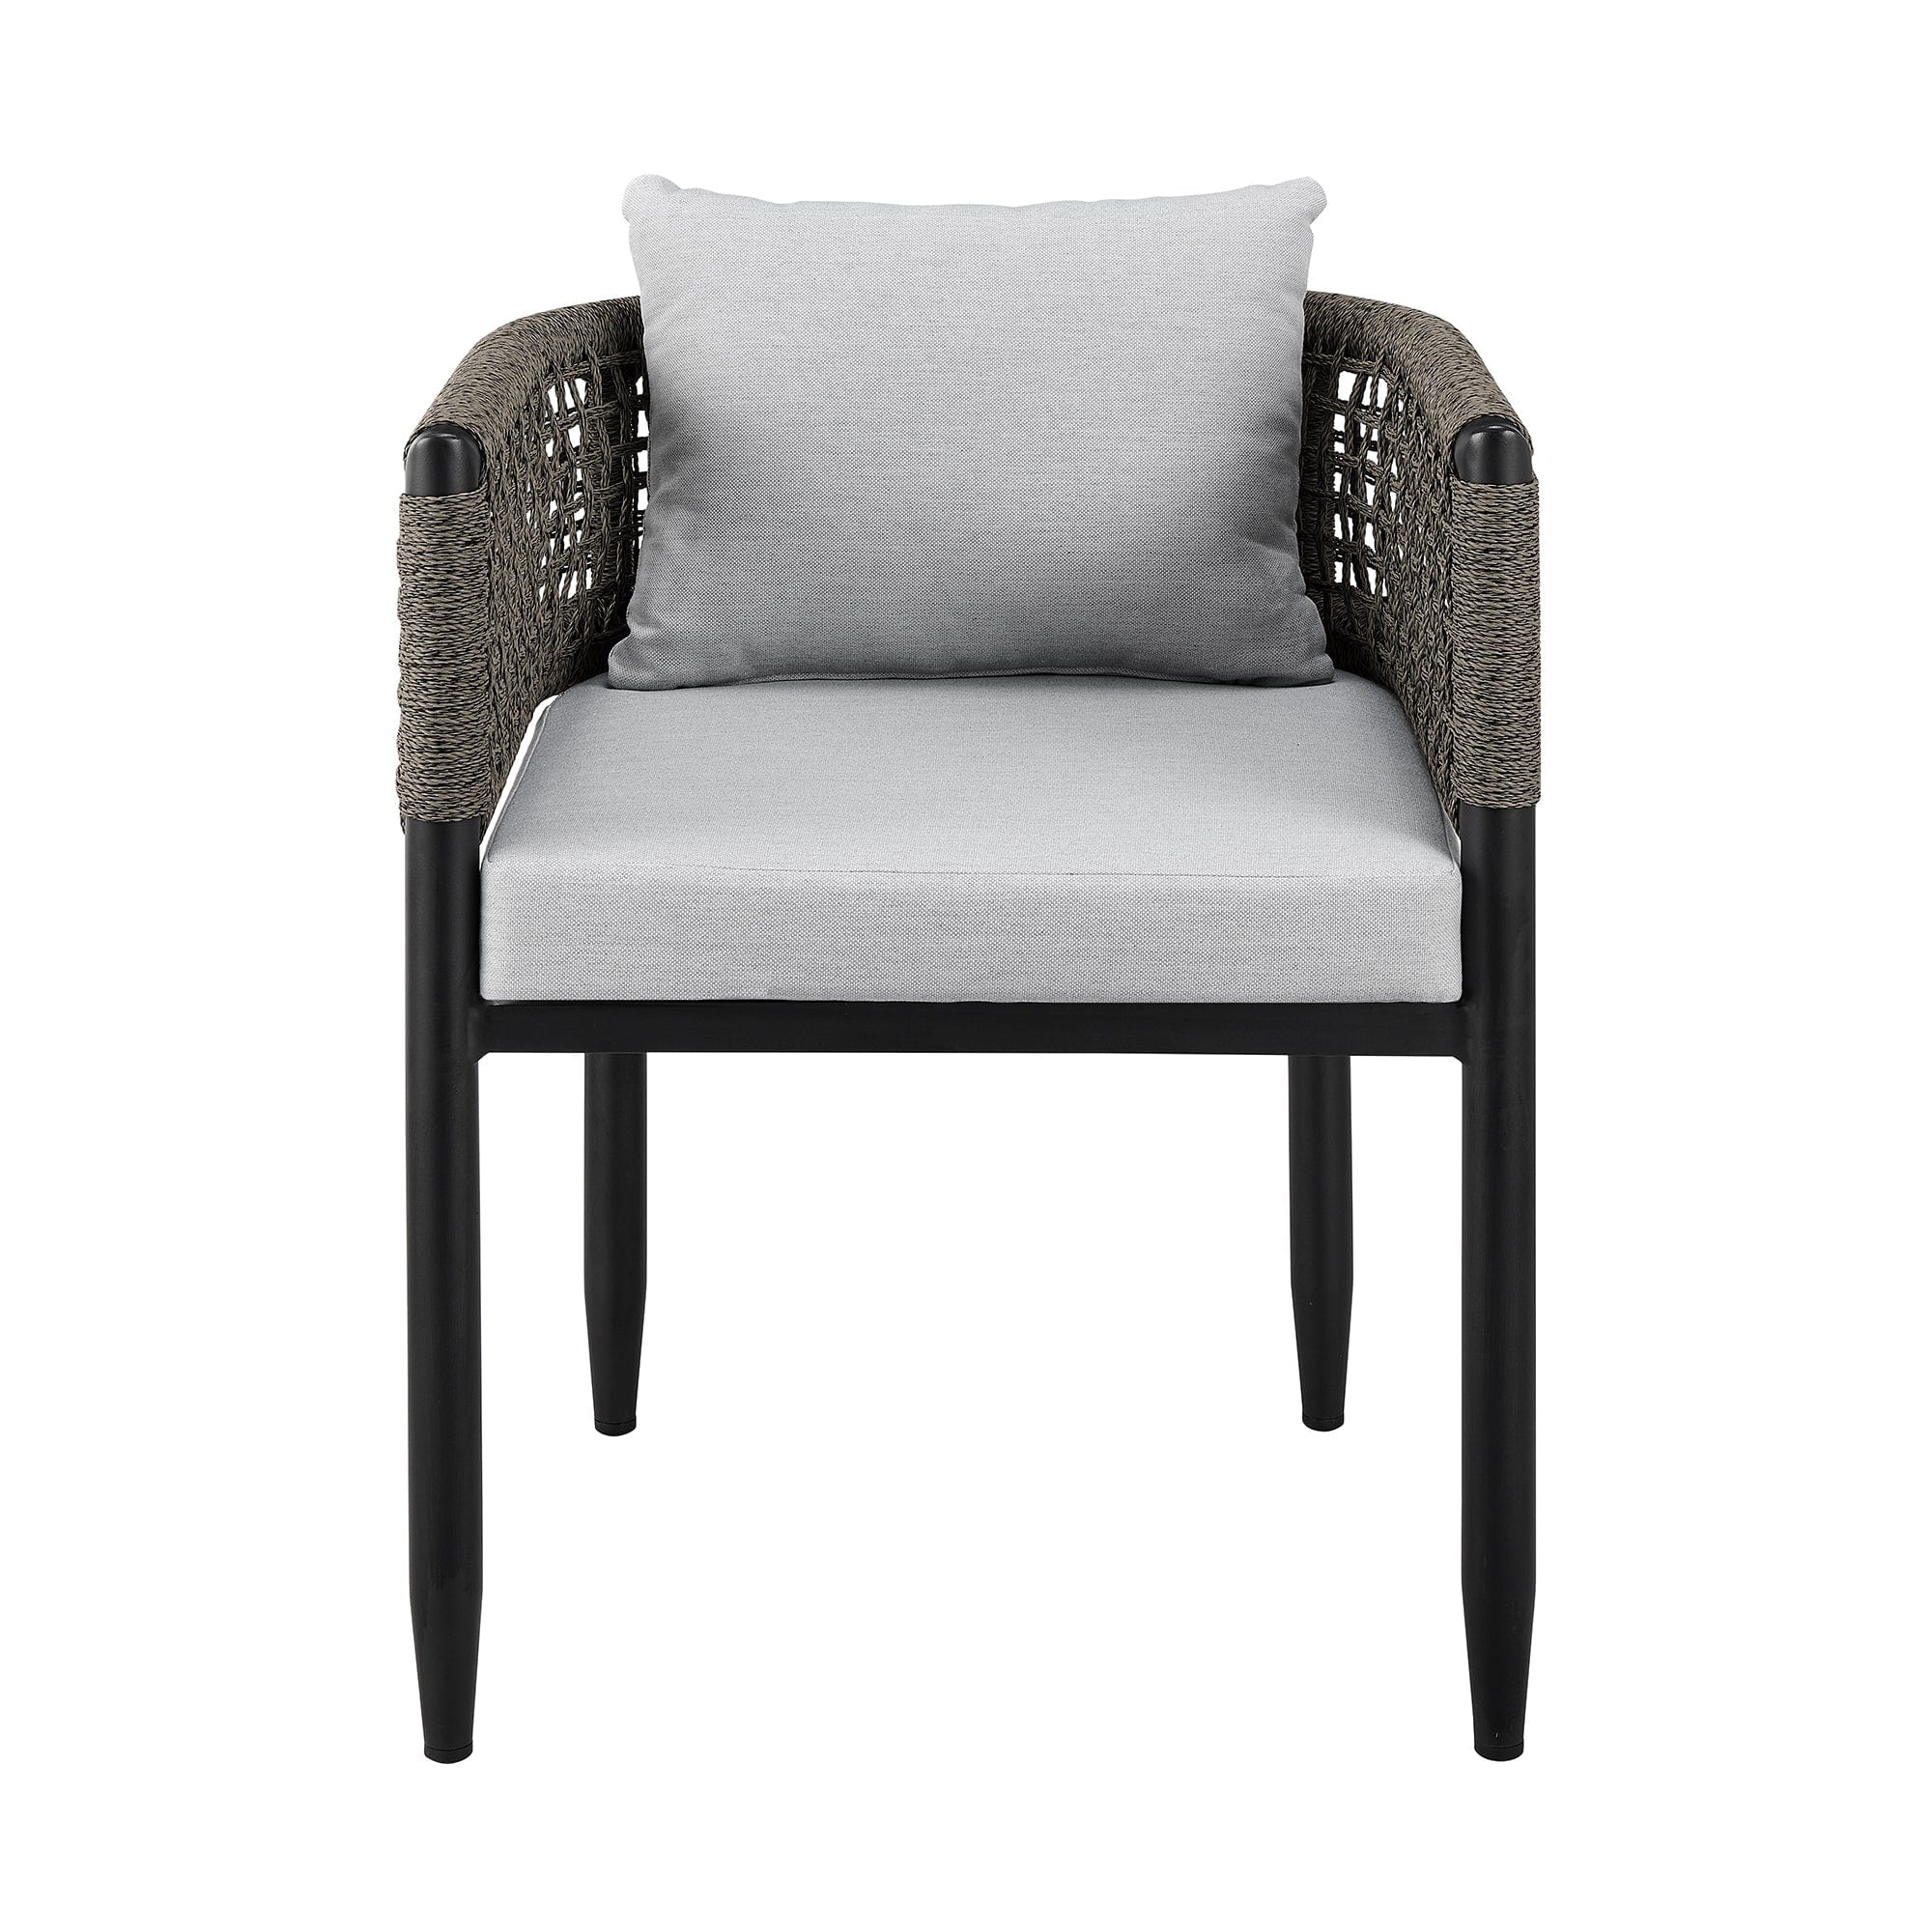 Armen Living Outdoor Dining Chair Armen Living | Alegria Outdoor Patio Dining Chair in Aluminum with Grey Rope and Cushions - Set of 2 | LCAFCHBL